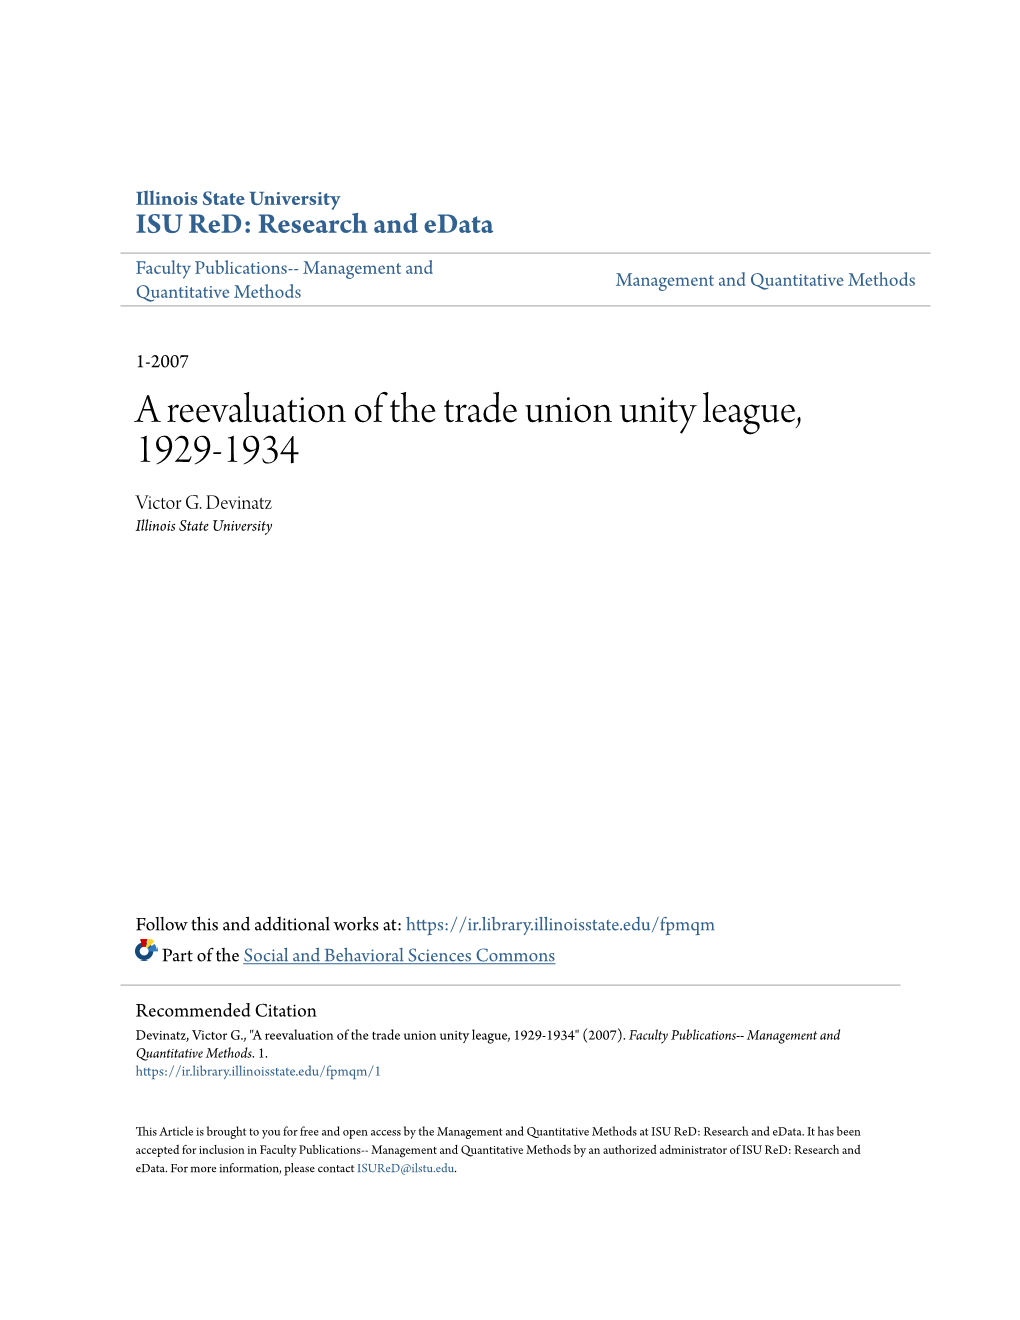 A Reevaluation of the Trade Union Unity League, 1929-1934 Victor G